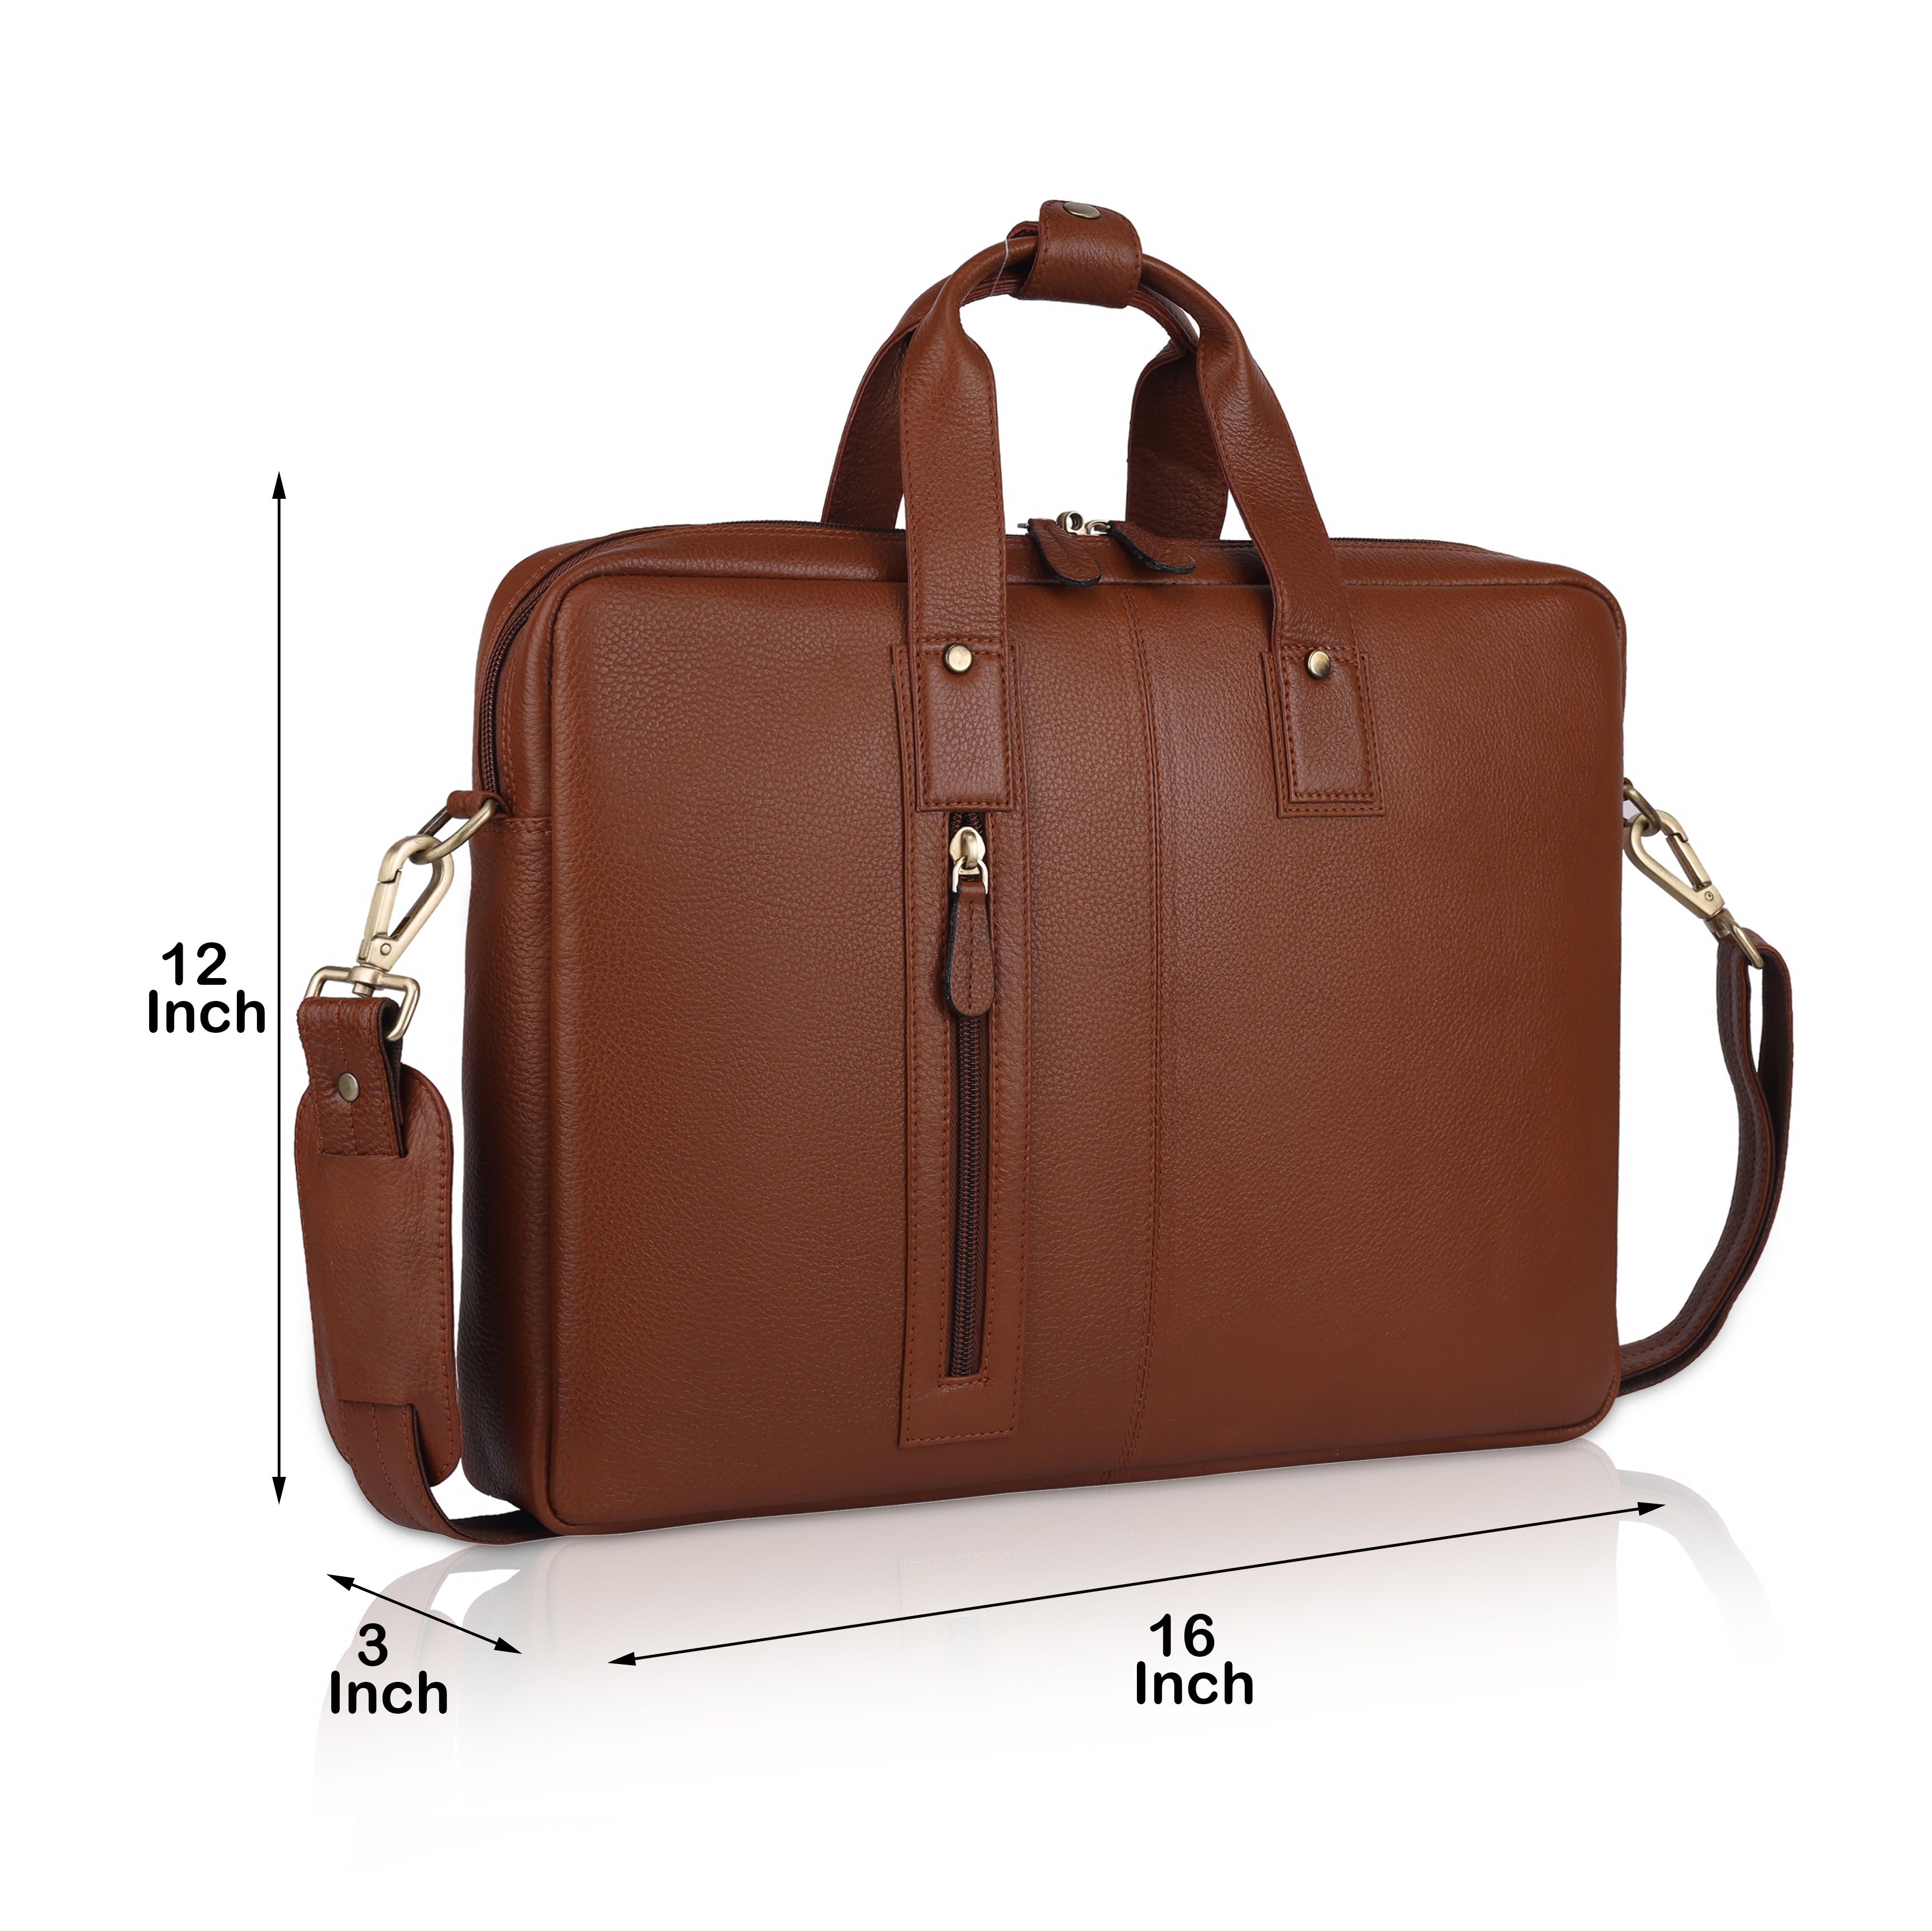 Genuine Leather Laptop Messenger Bags for Men and Women Tan SkinOutfit